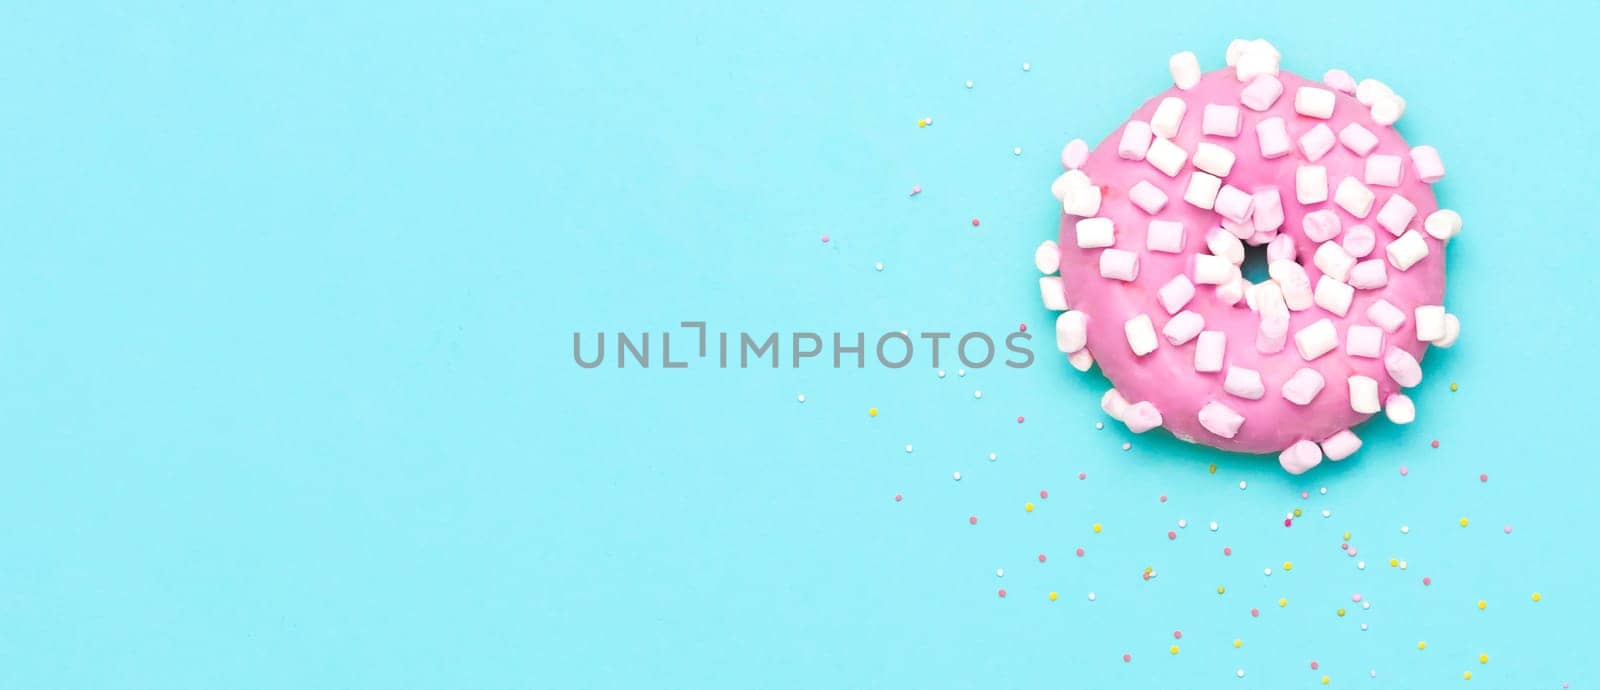 Pink donut with murshmallow and sprinkles, top view on blue background